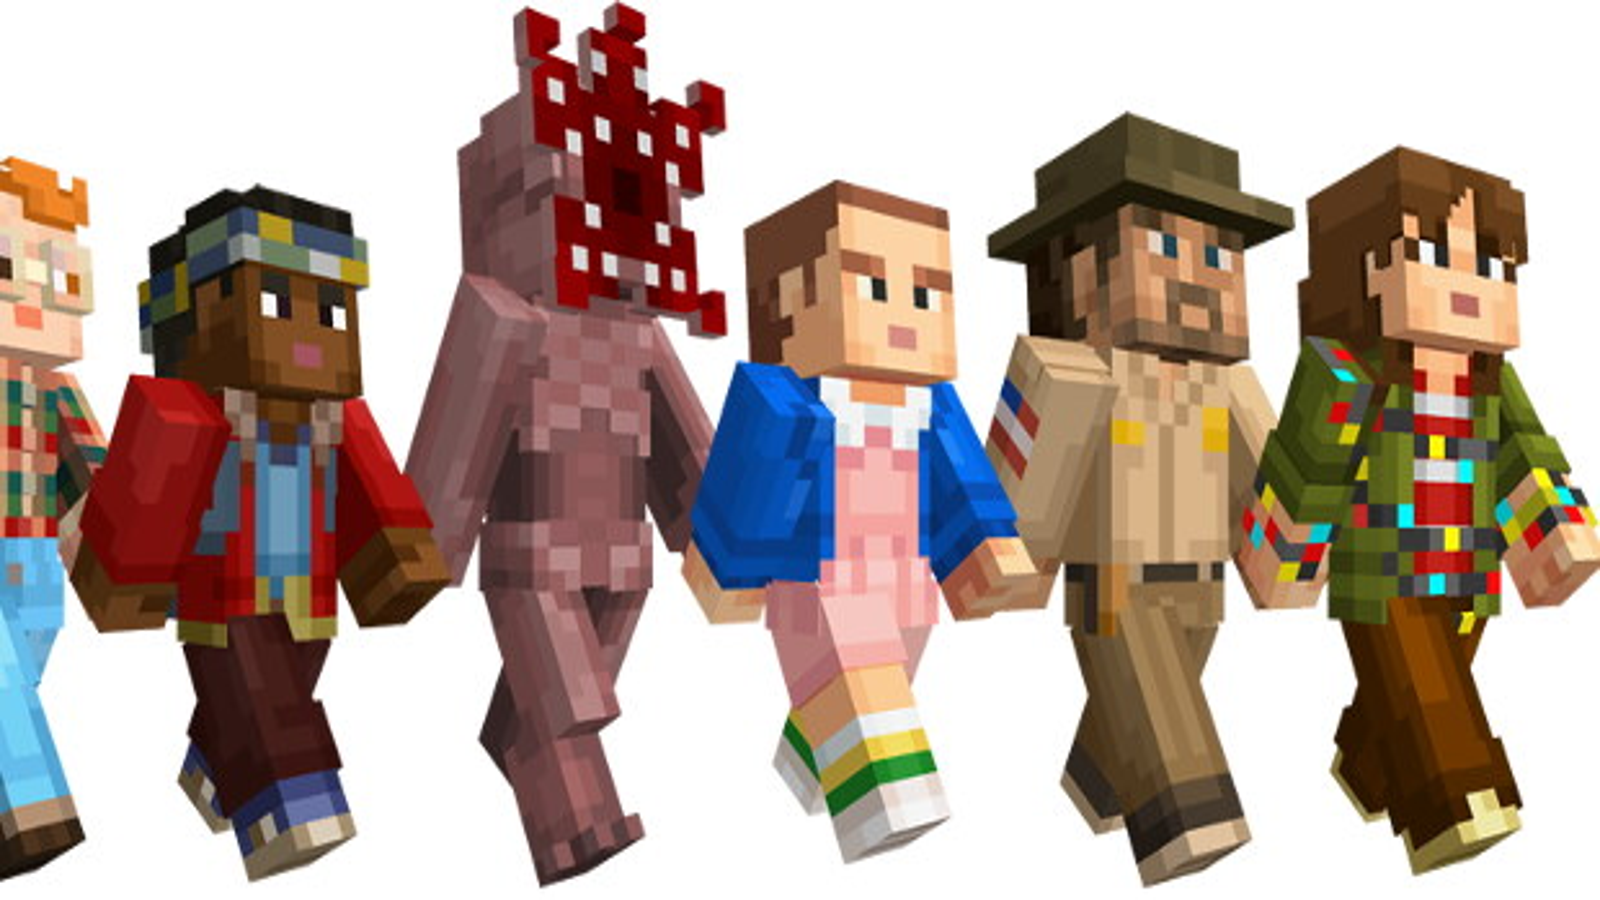 Minecraft Skin Pack 1 - All skins preview (NEW DLC) 